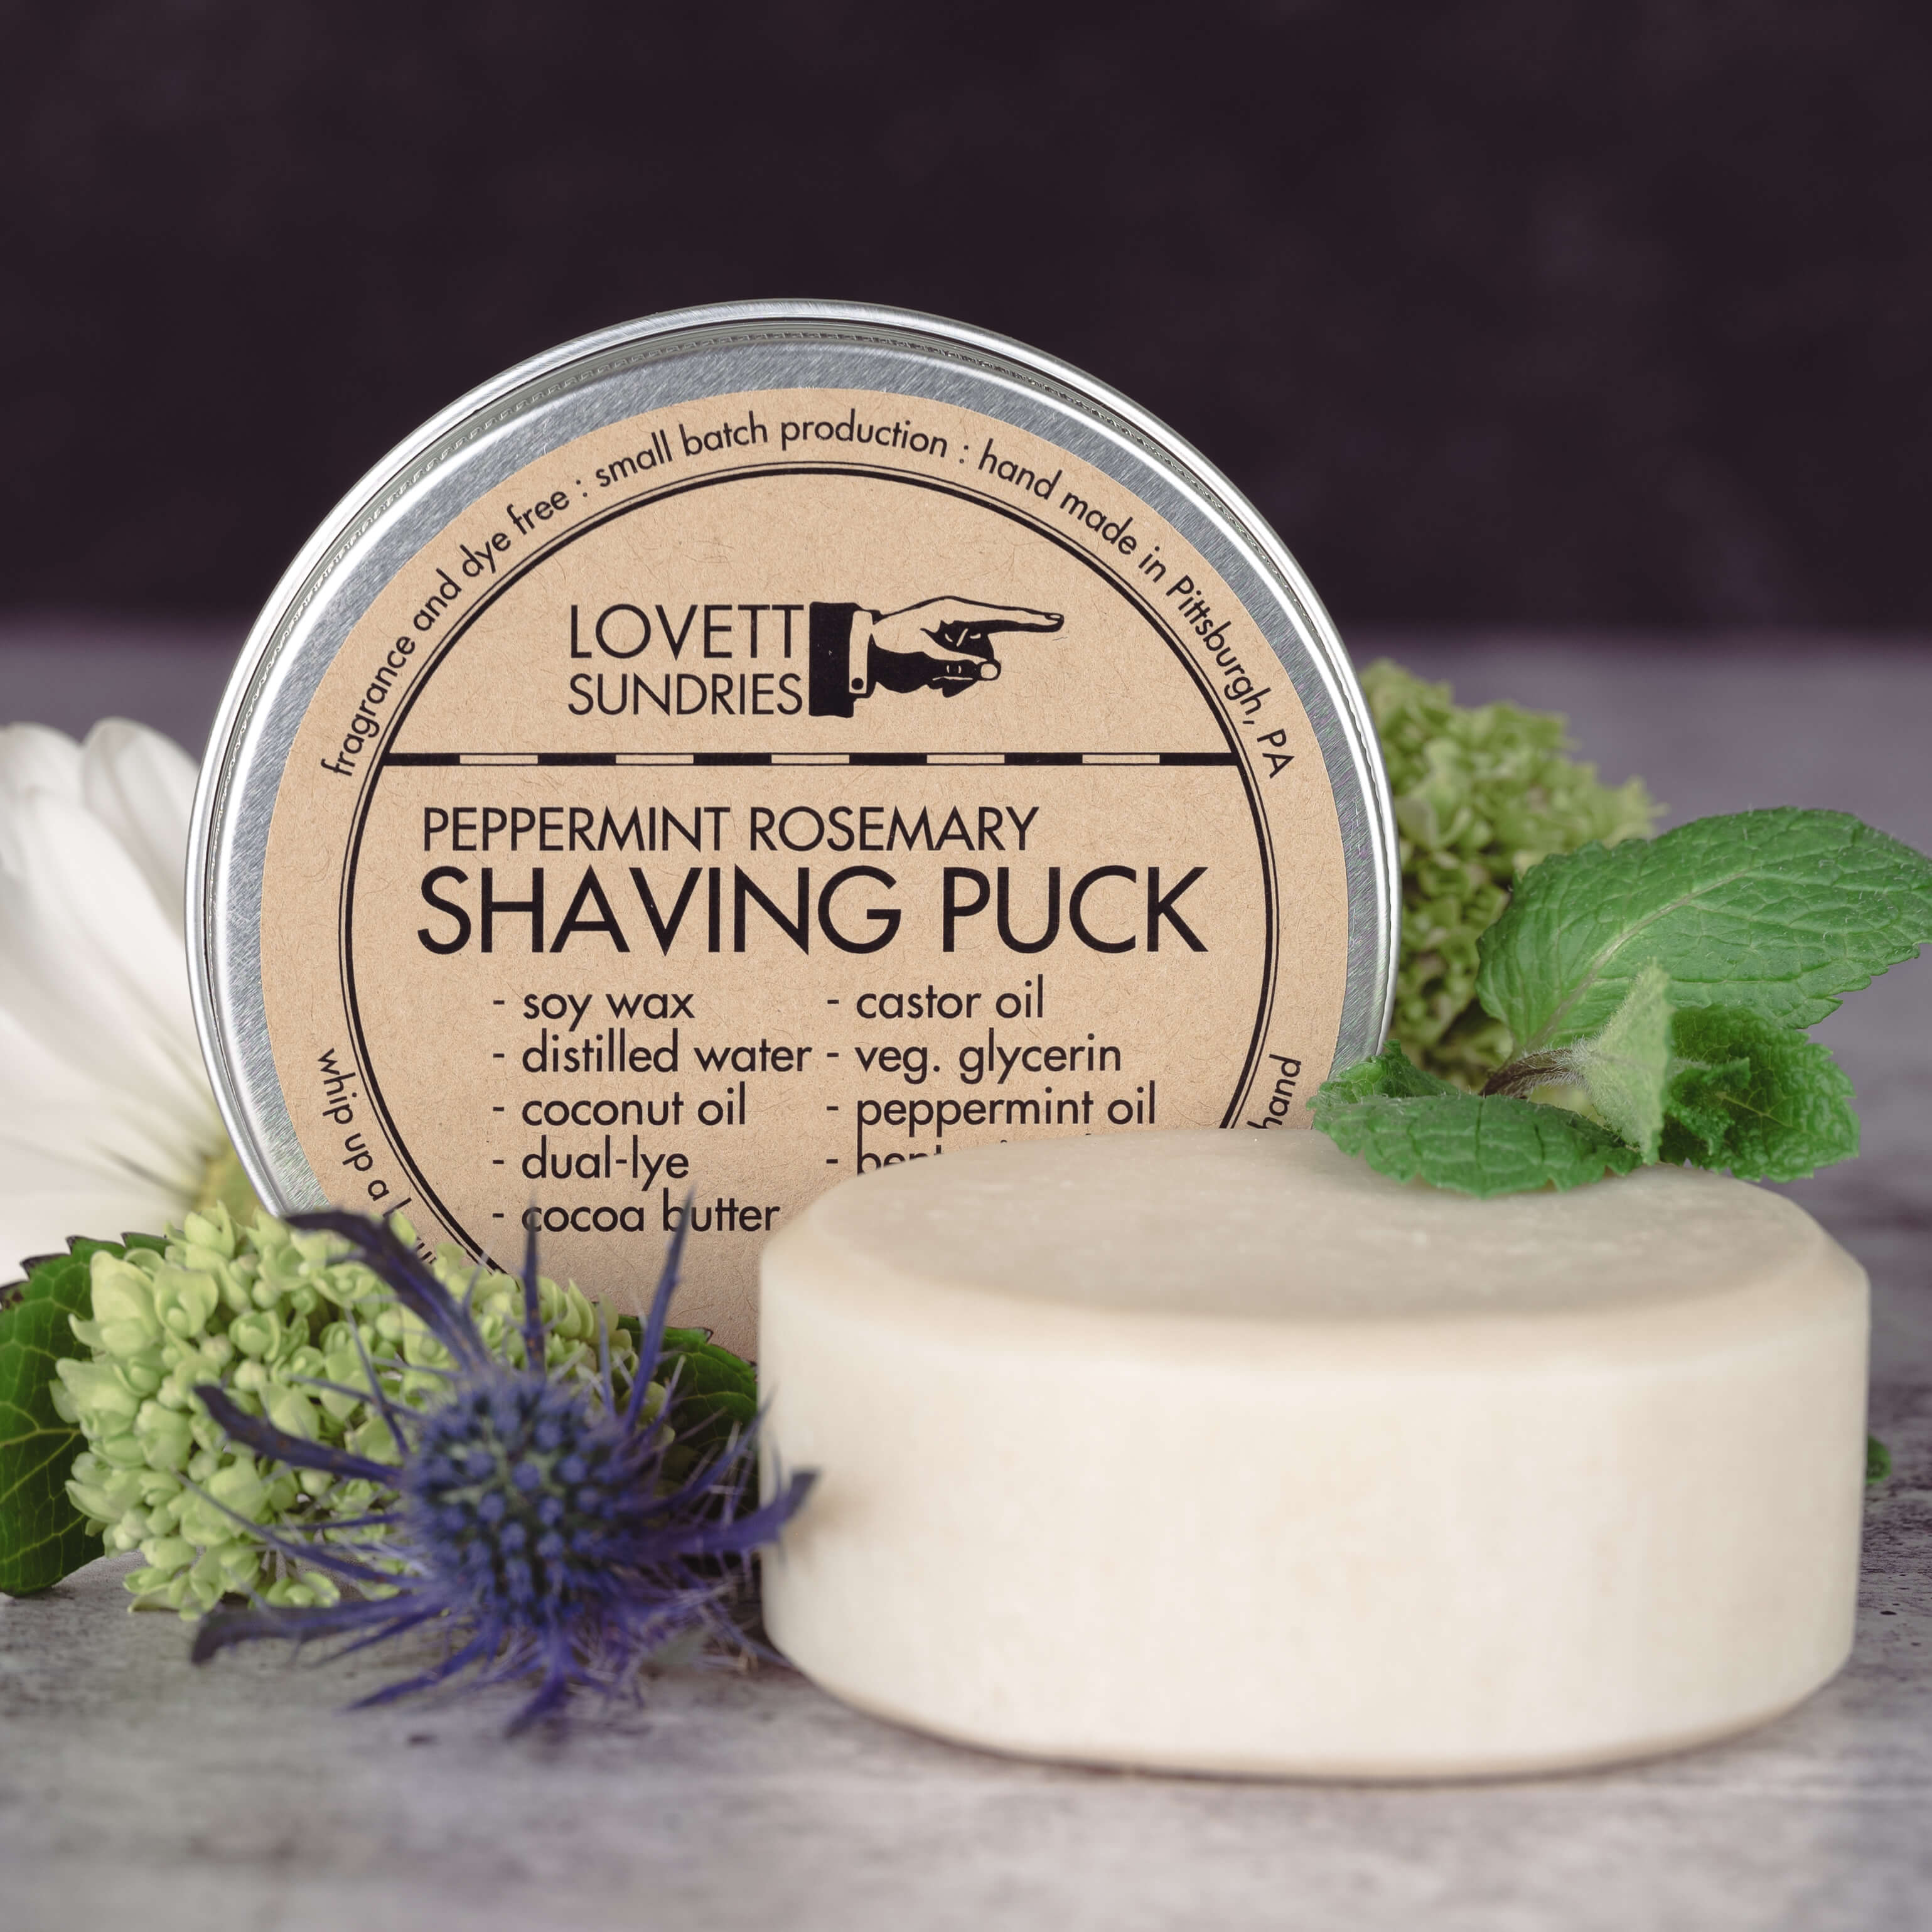 All natural good lathering peppermint rosemary shaving soap.